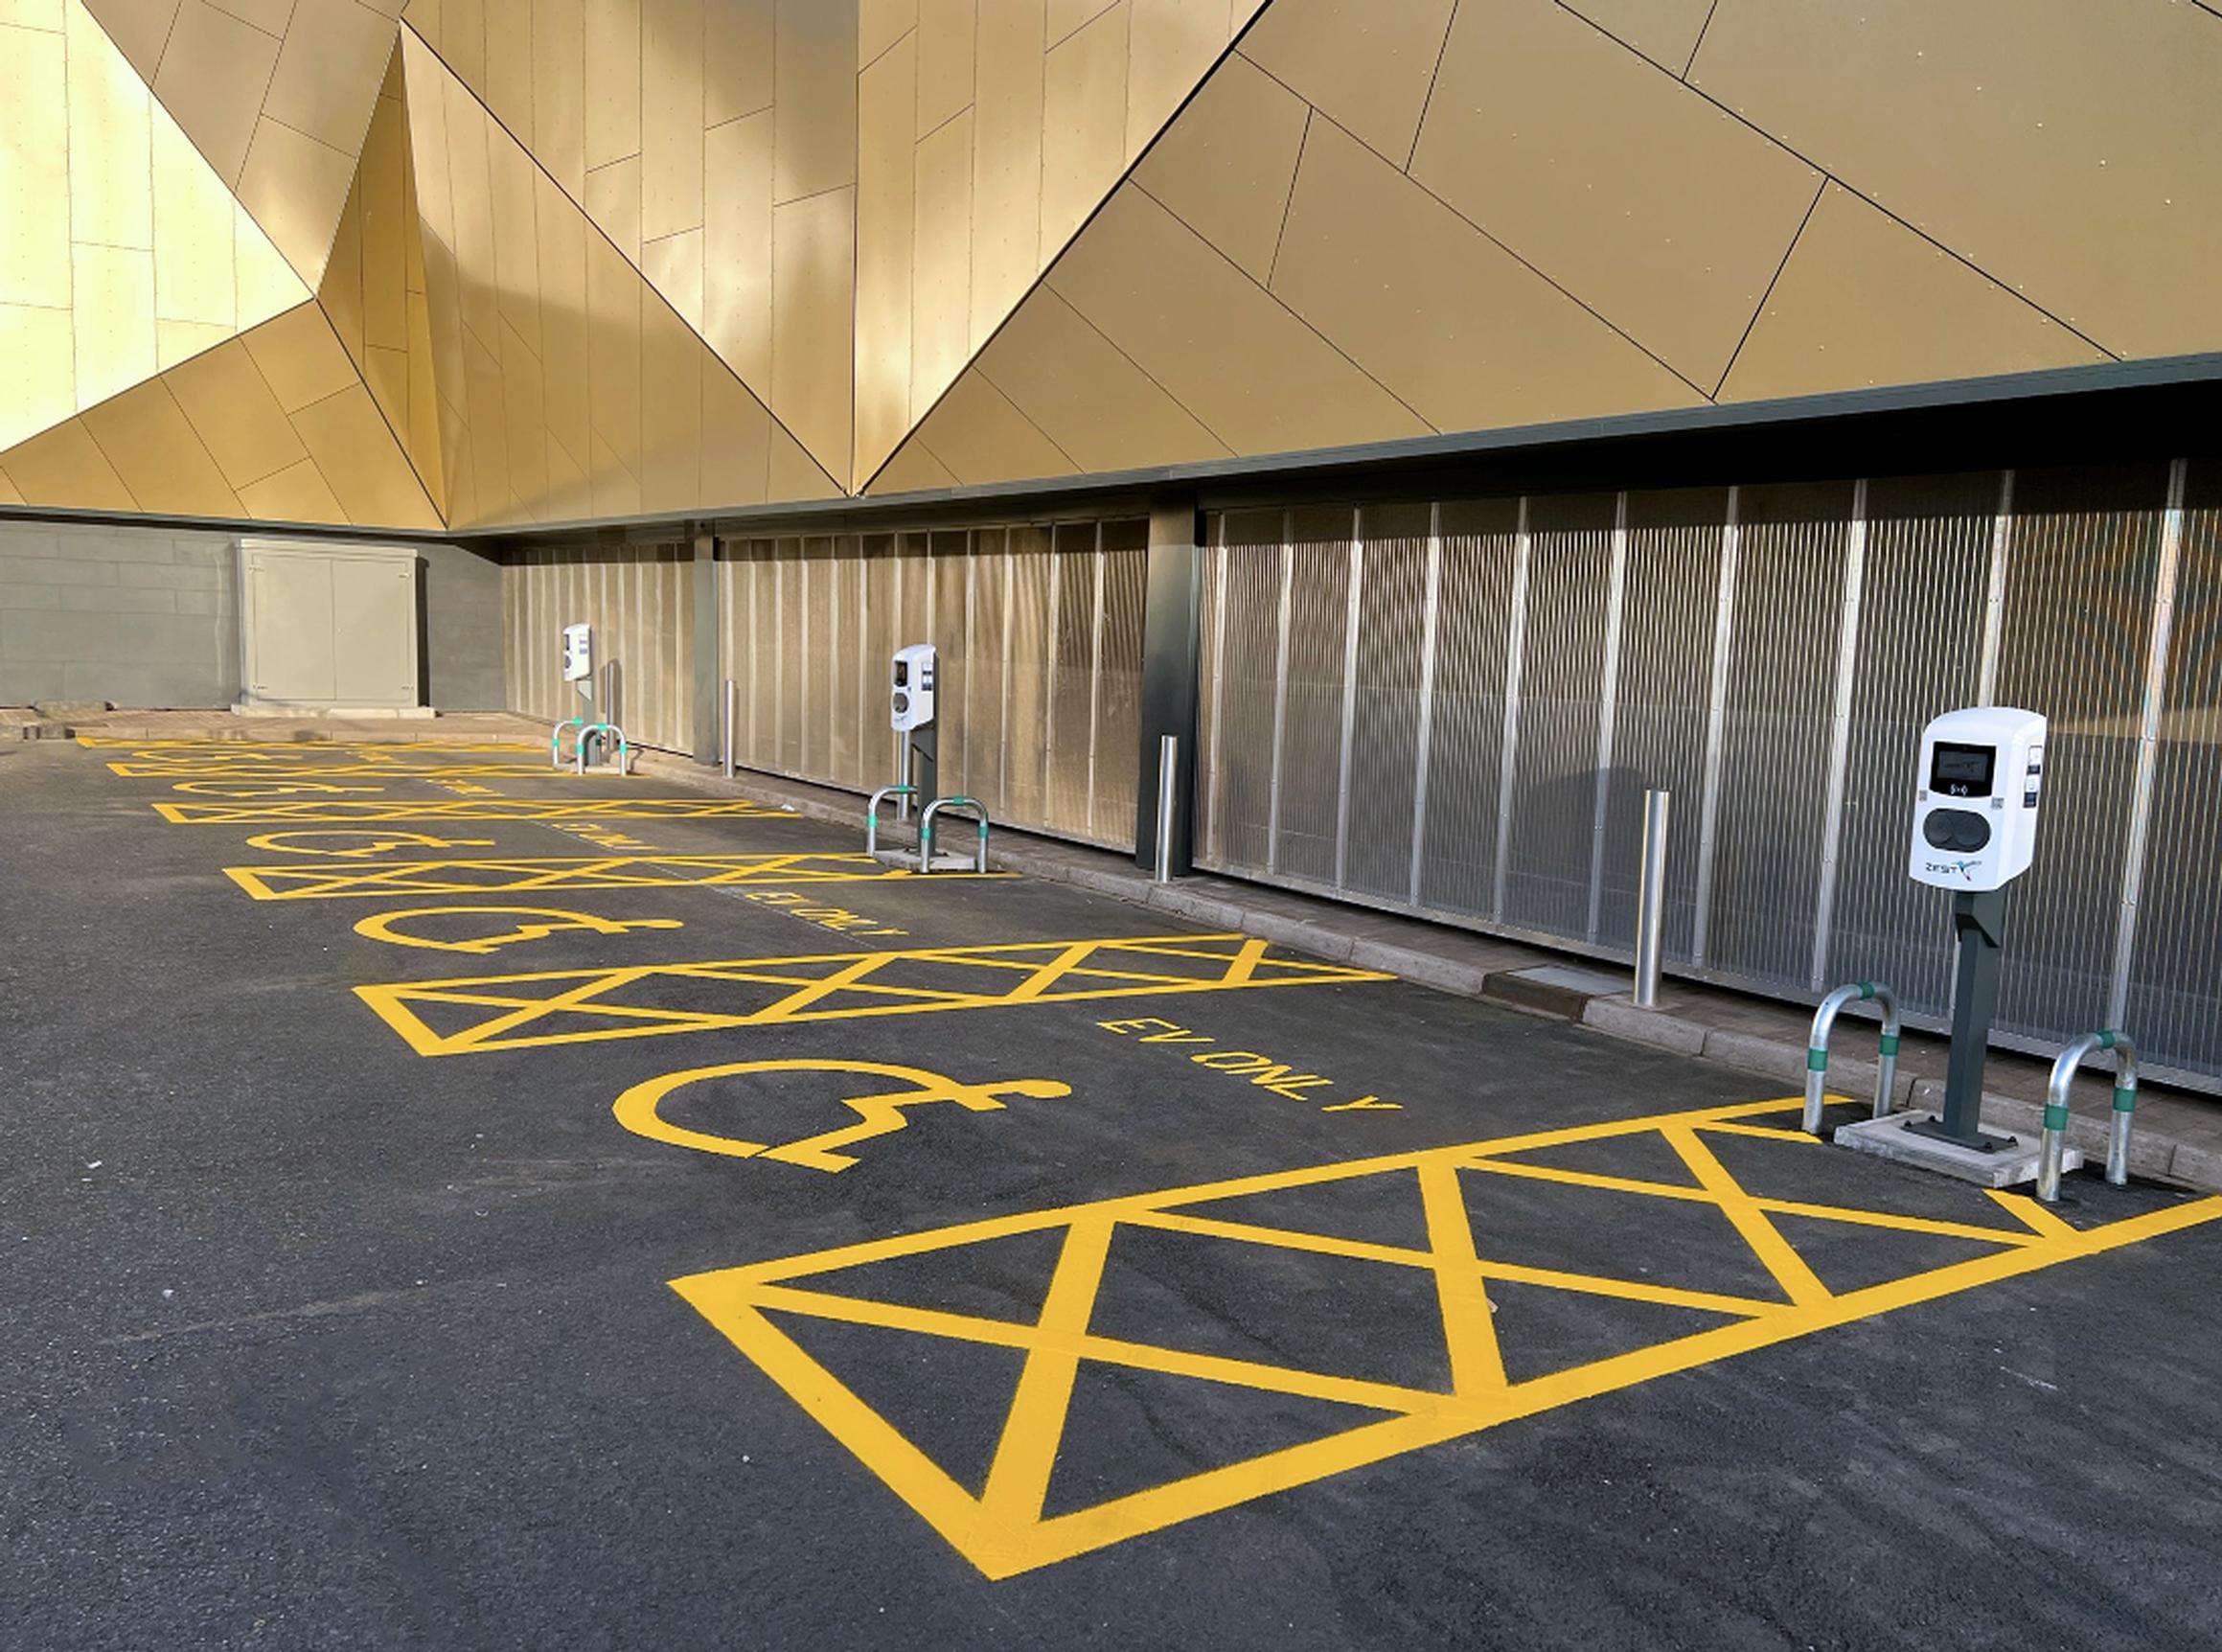 With the ability to charge 64 cars simultaneously, the Merry Hill installation is one of the largest EV charging initiatives in the West Midlands